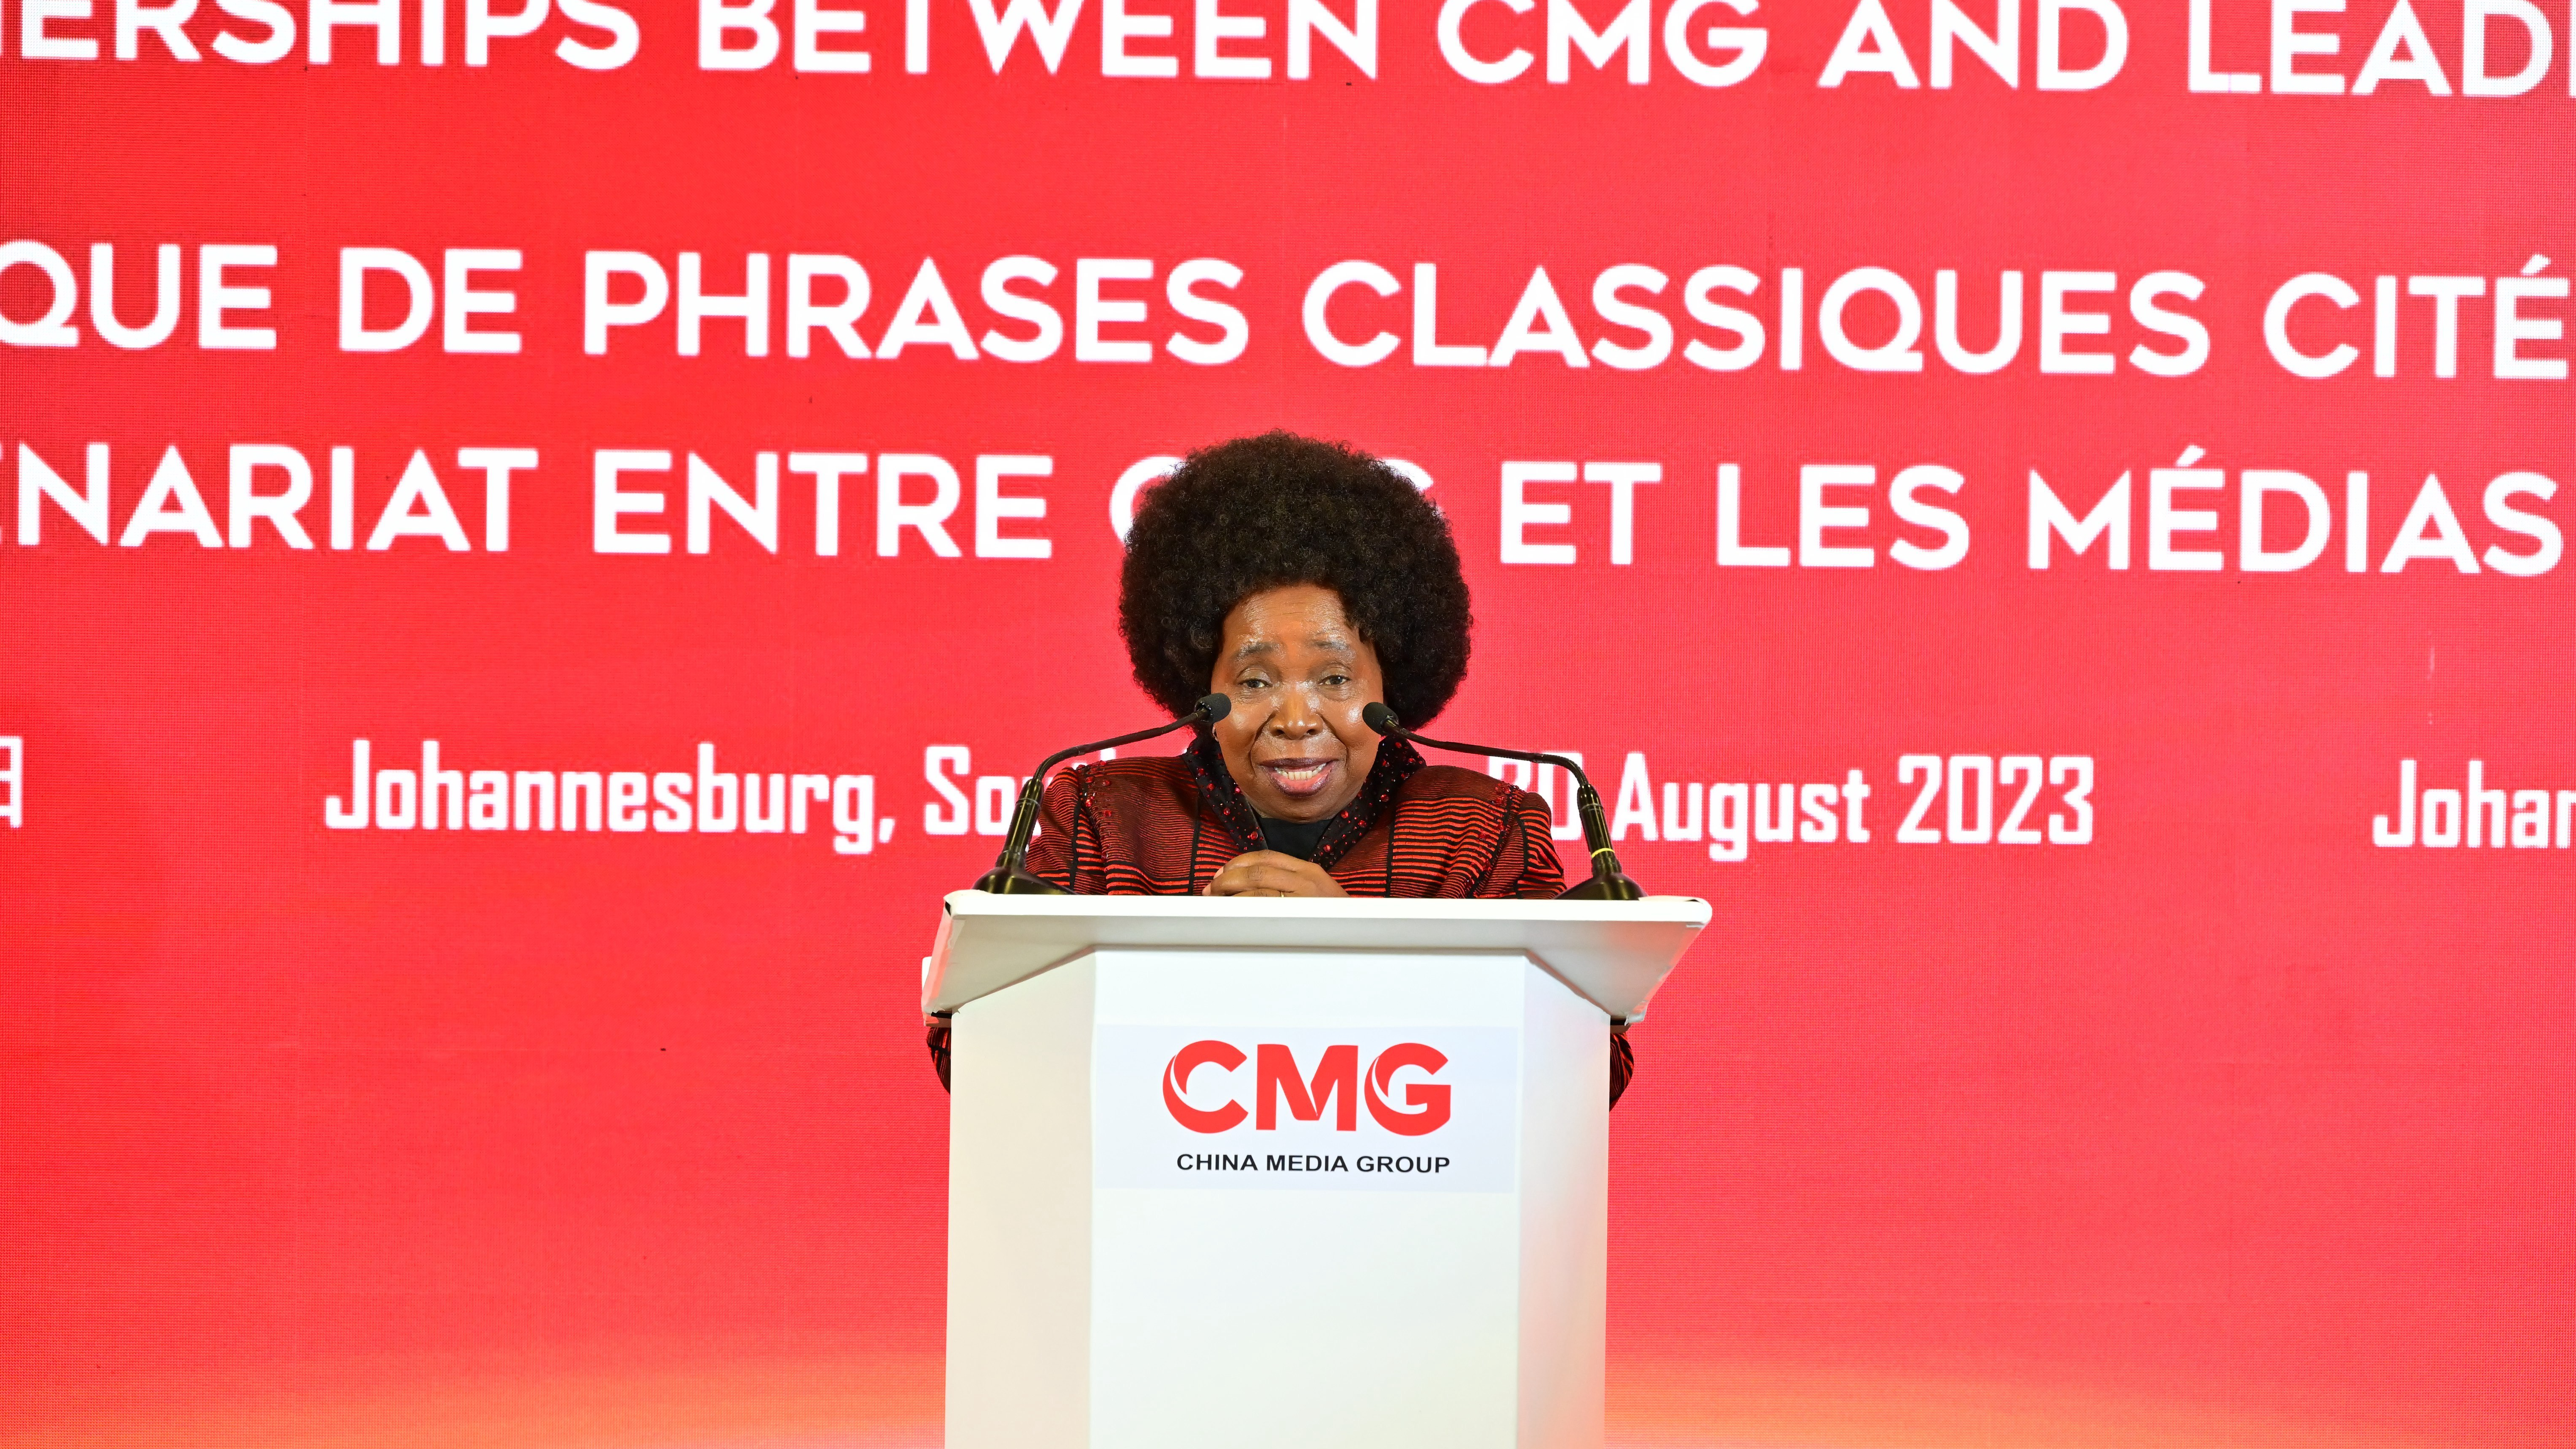 Dlamini Zuma, minister of the Presidency for Women, Youth and Persons with Disability in the Republic of South Africa, delivers a speech, Johannesburg, South Africa, August 20, 2023. /CMG